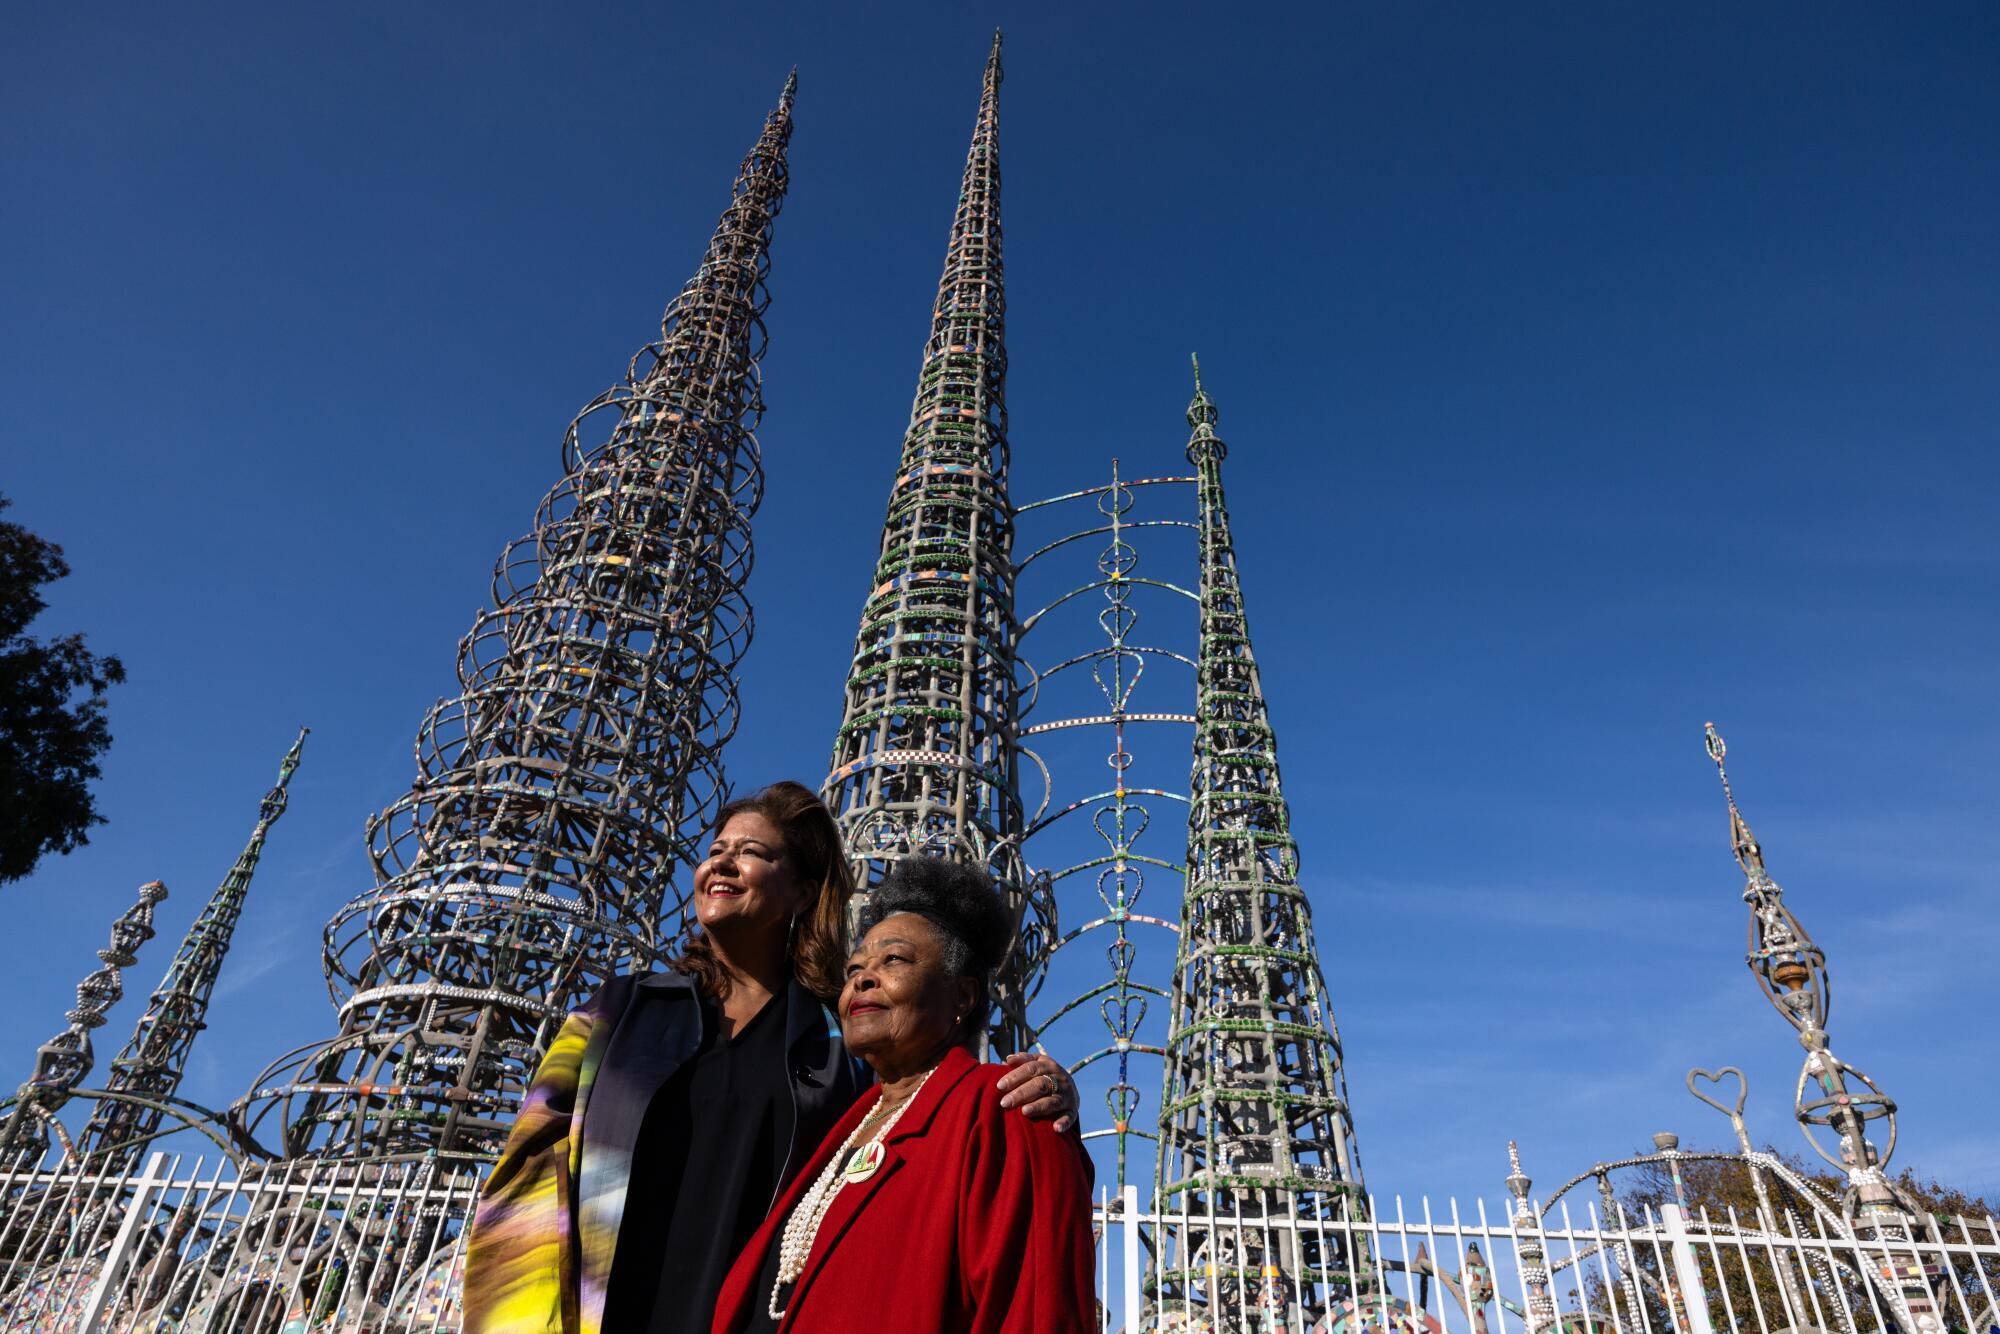 Elizabeth Alexander puts her arm around Rosie Lee Hooks before the mosaic-covered forms of the Watts Towers